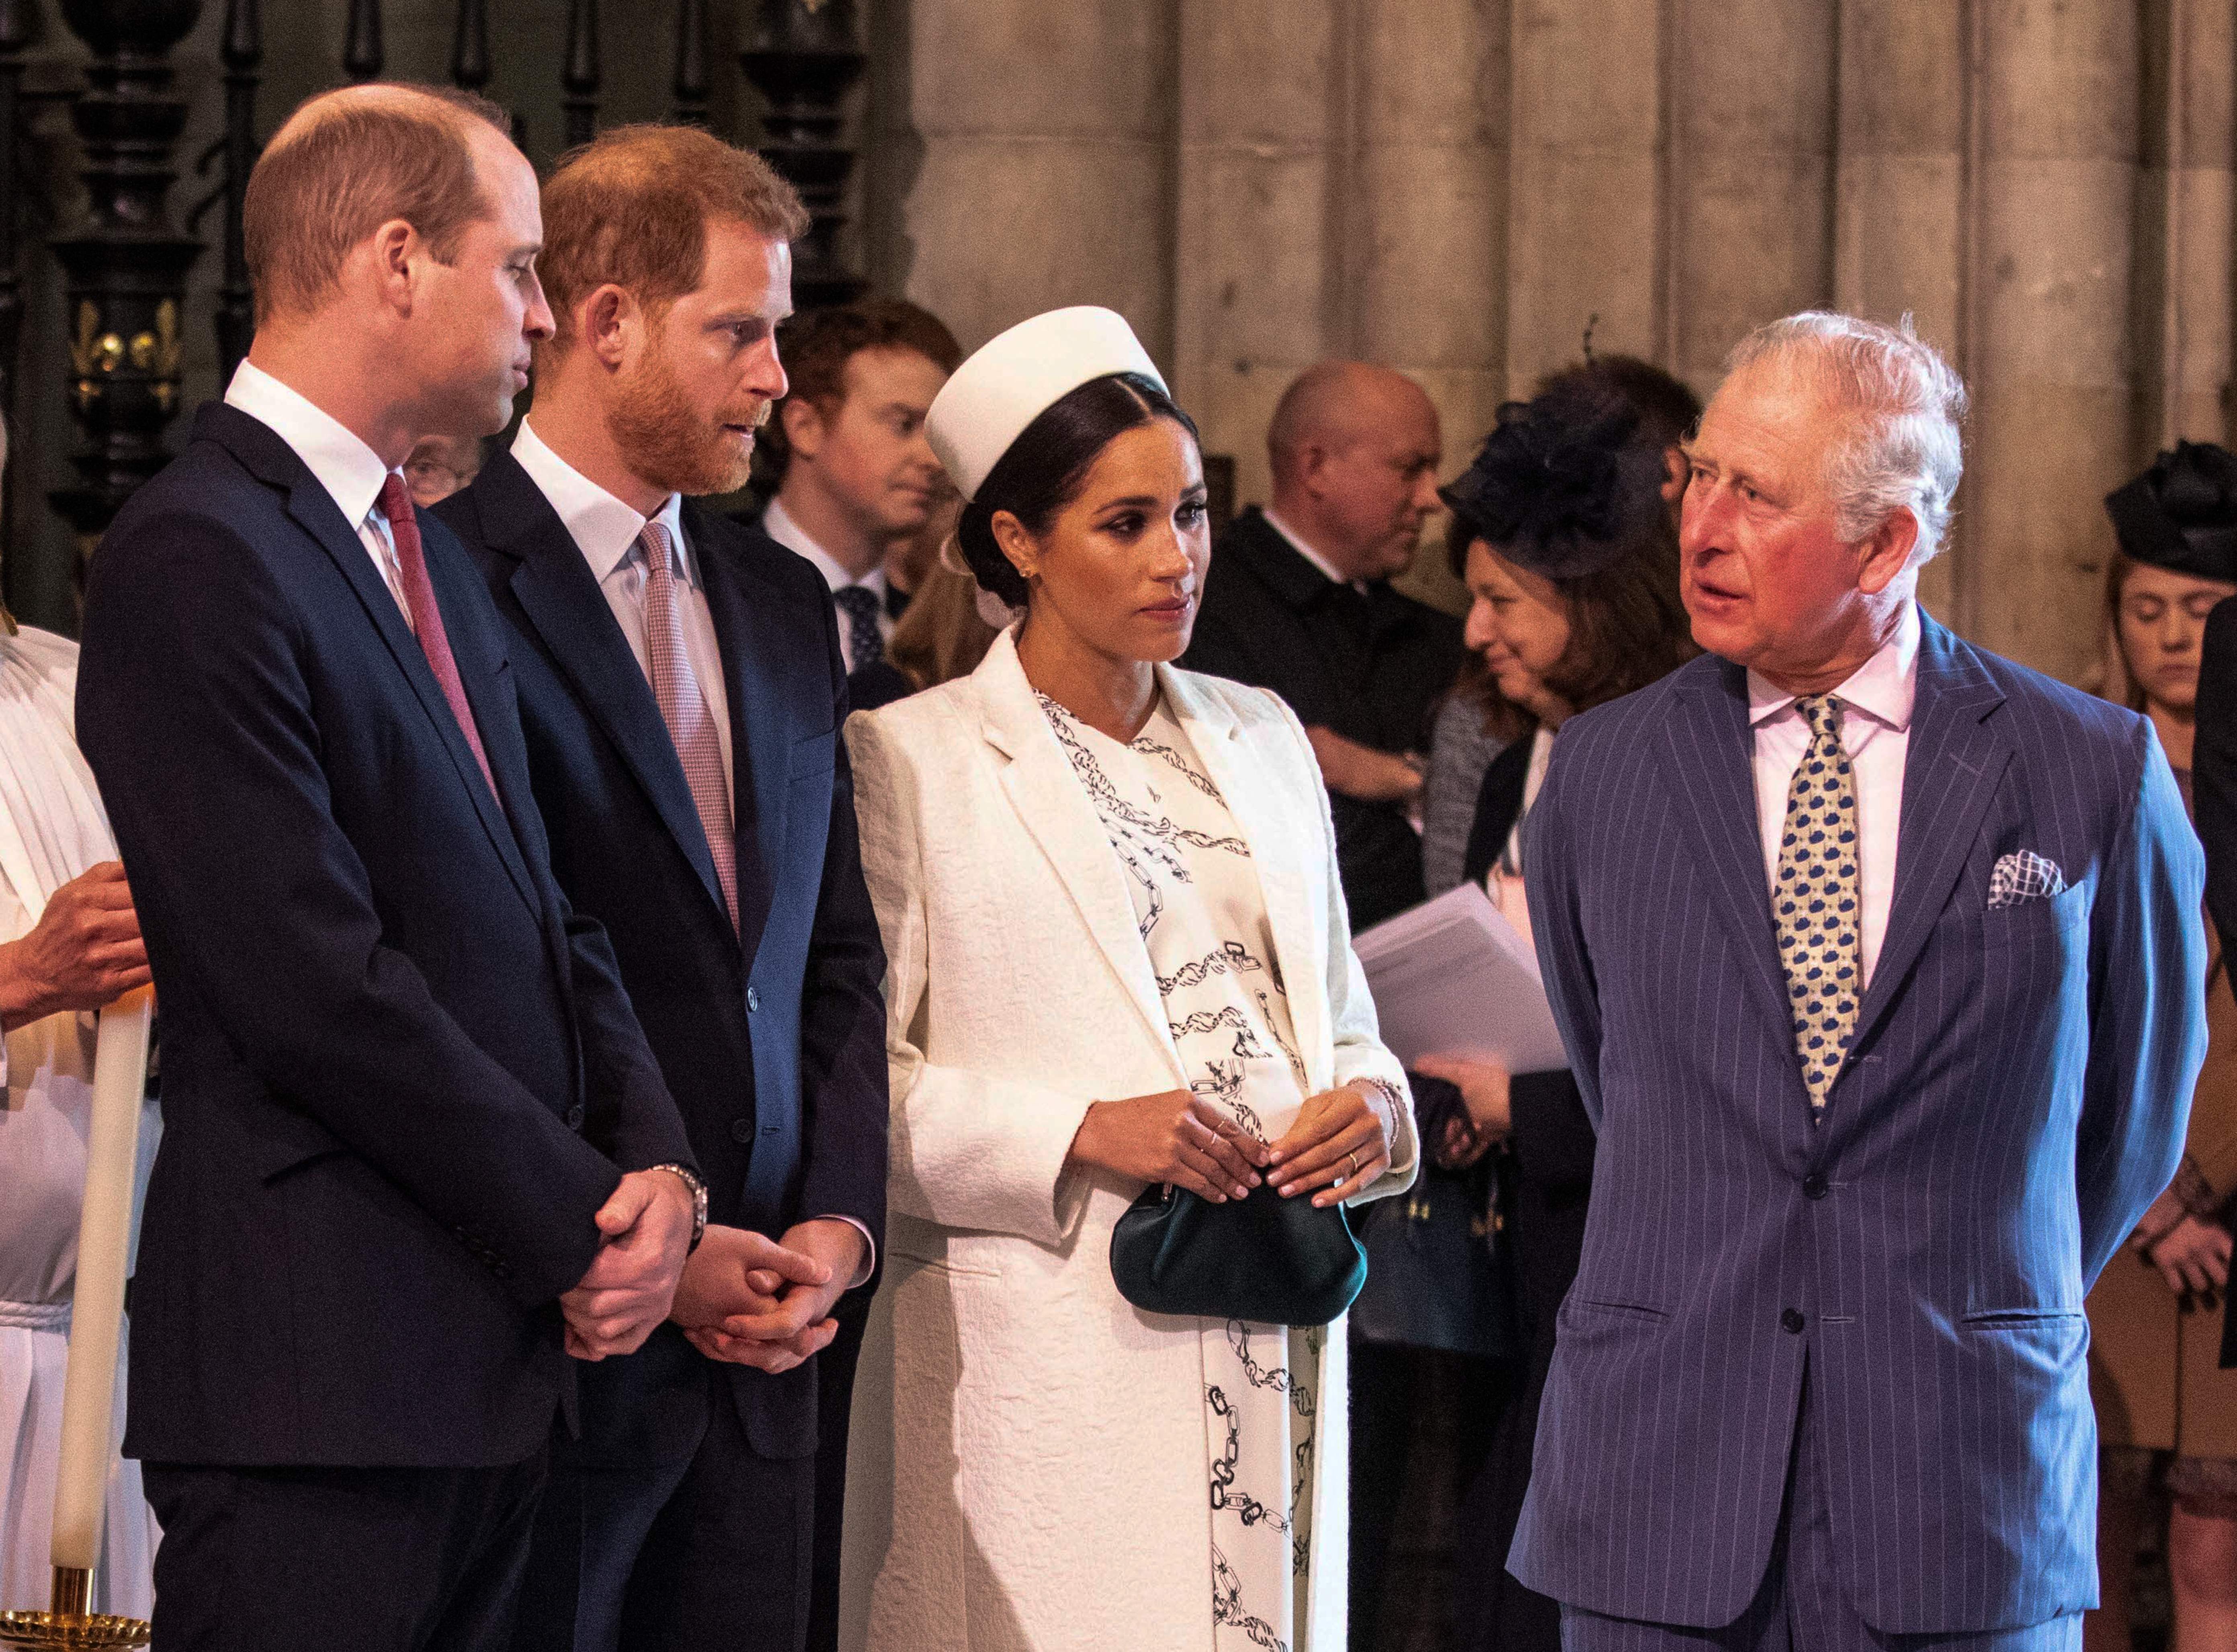 Meghan, Duchess of Sussex talks with Prince Charles, Prince of Wales as Prince William, Duke of Cambridge talks with Prince Harry, Duke of Sussex, at the Commonwealth Day service in London on March 11, 2019. | Source: Getty Images